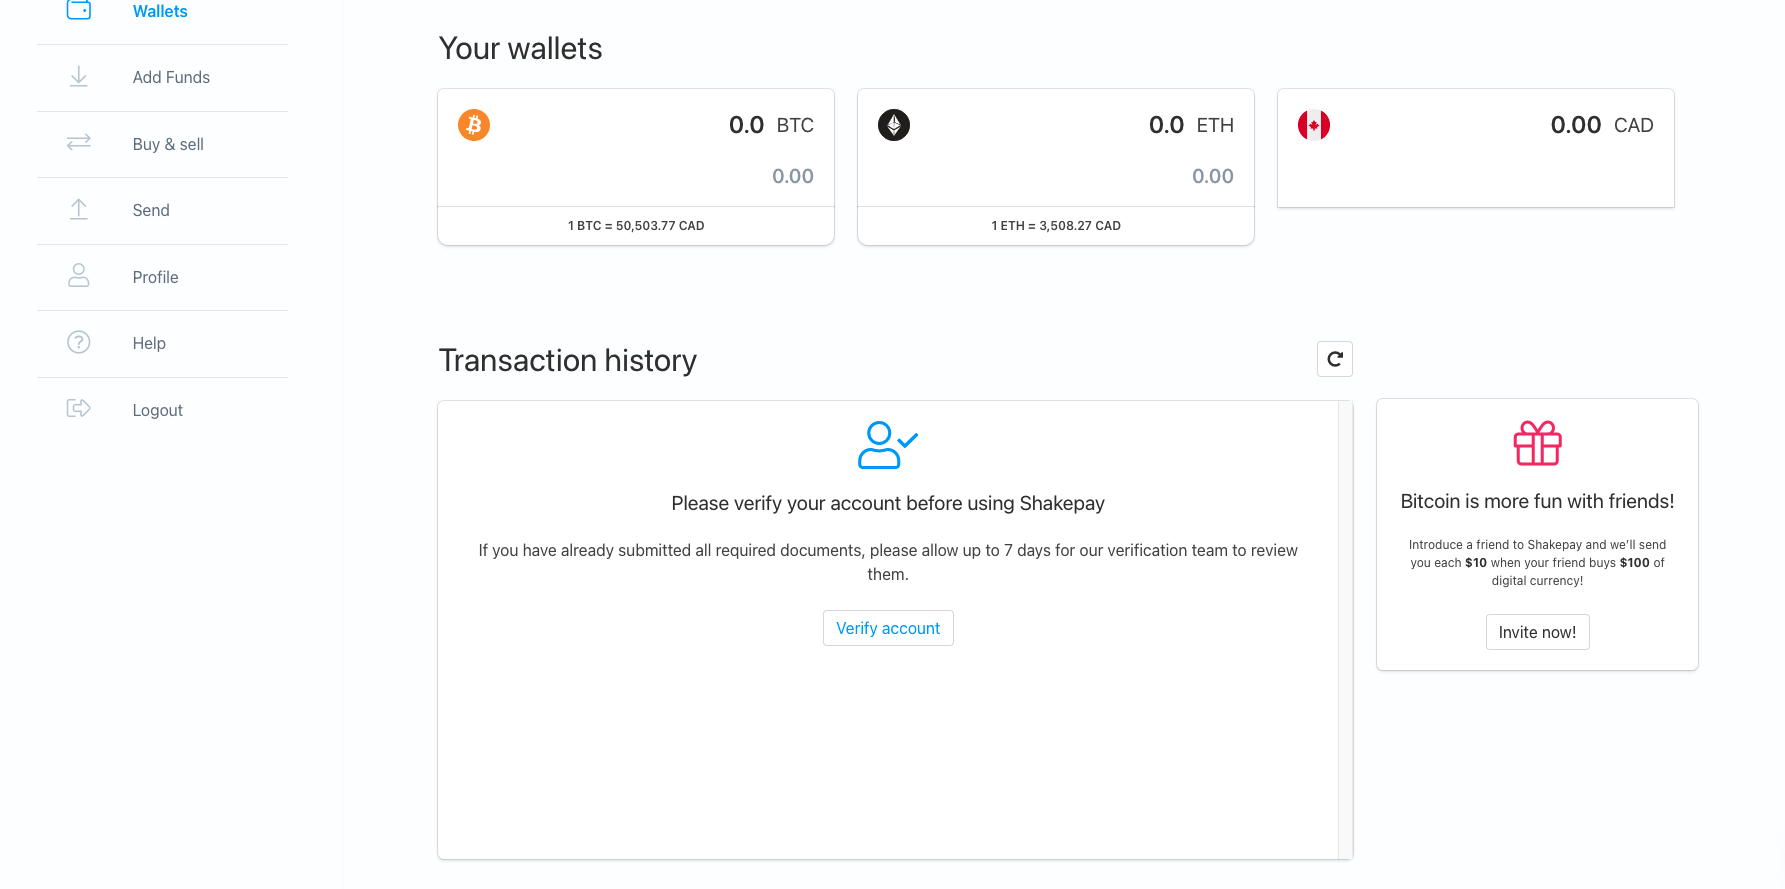 Wallet and transaction history interface in Shakepay app